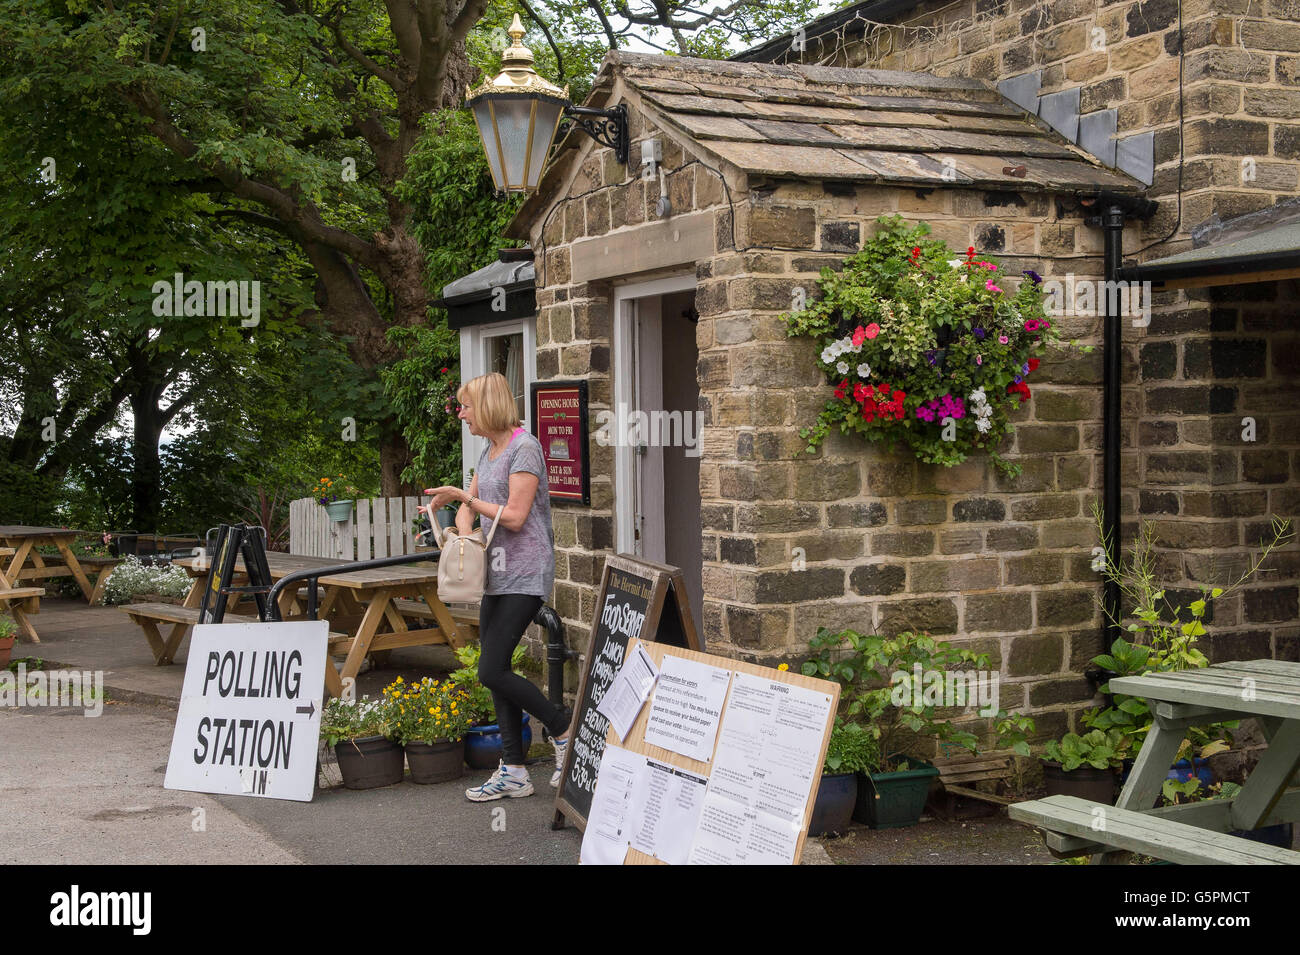 The Hermit, a village pub in Burley Woodhead, West Yorkshire, Britain. 23rd June, 2016. Having cast her vote, a voter leaves this EU Referendum Polling Station. Credit:  Ian Lamond/Alamy Live News Stock Photo